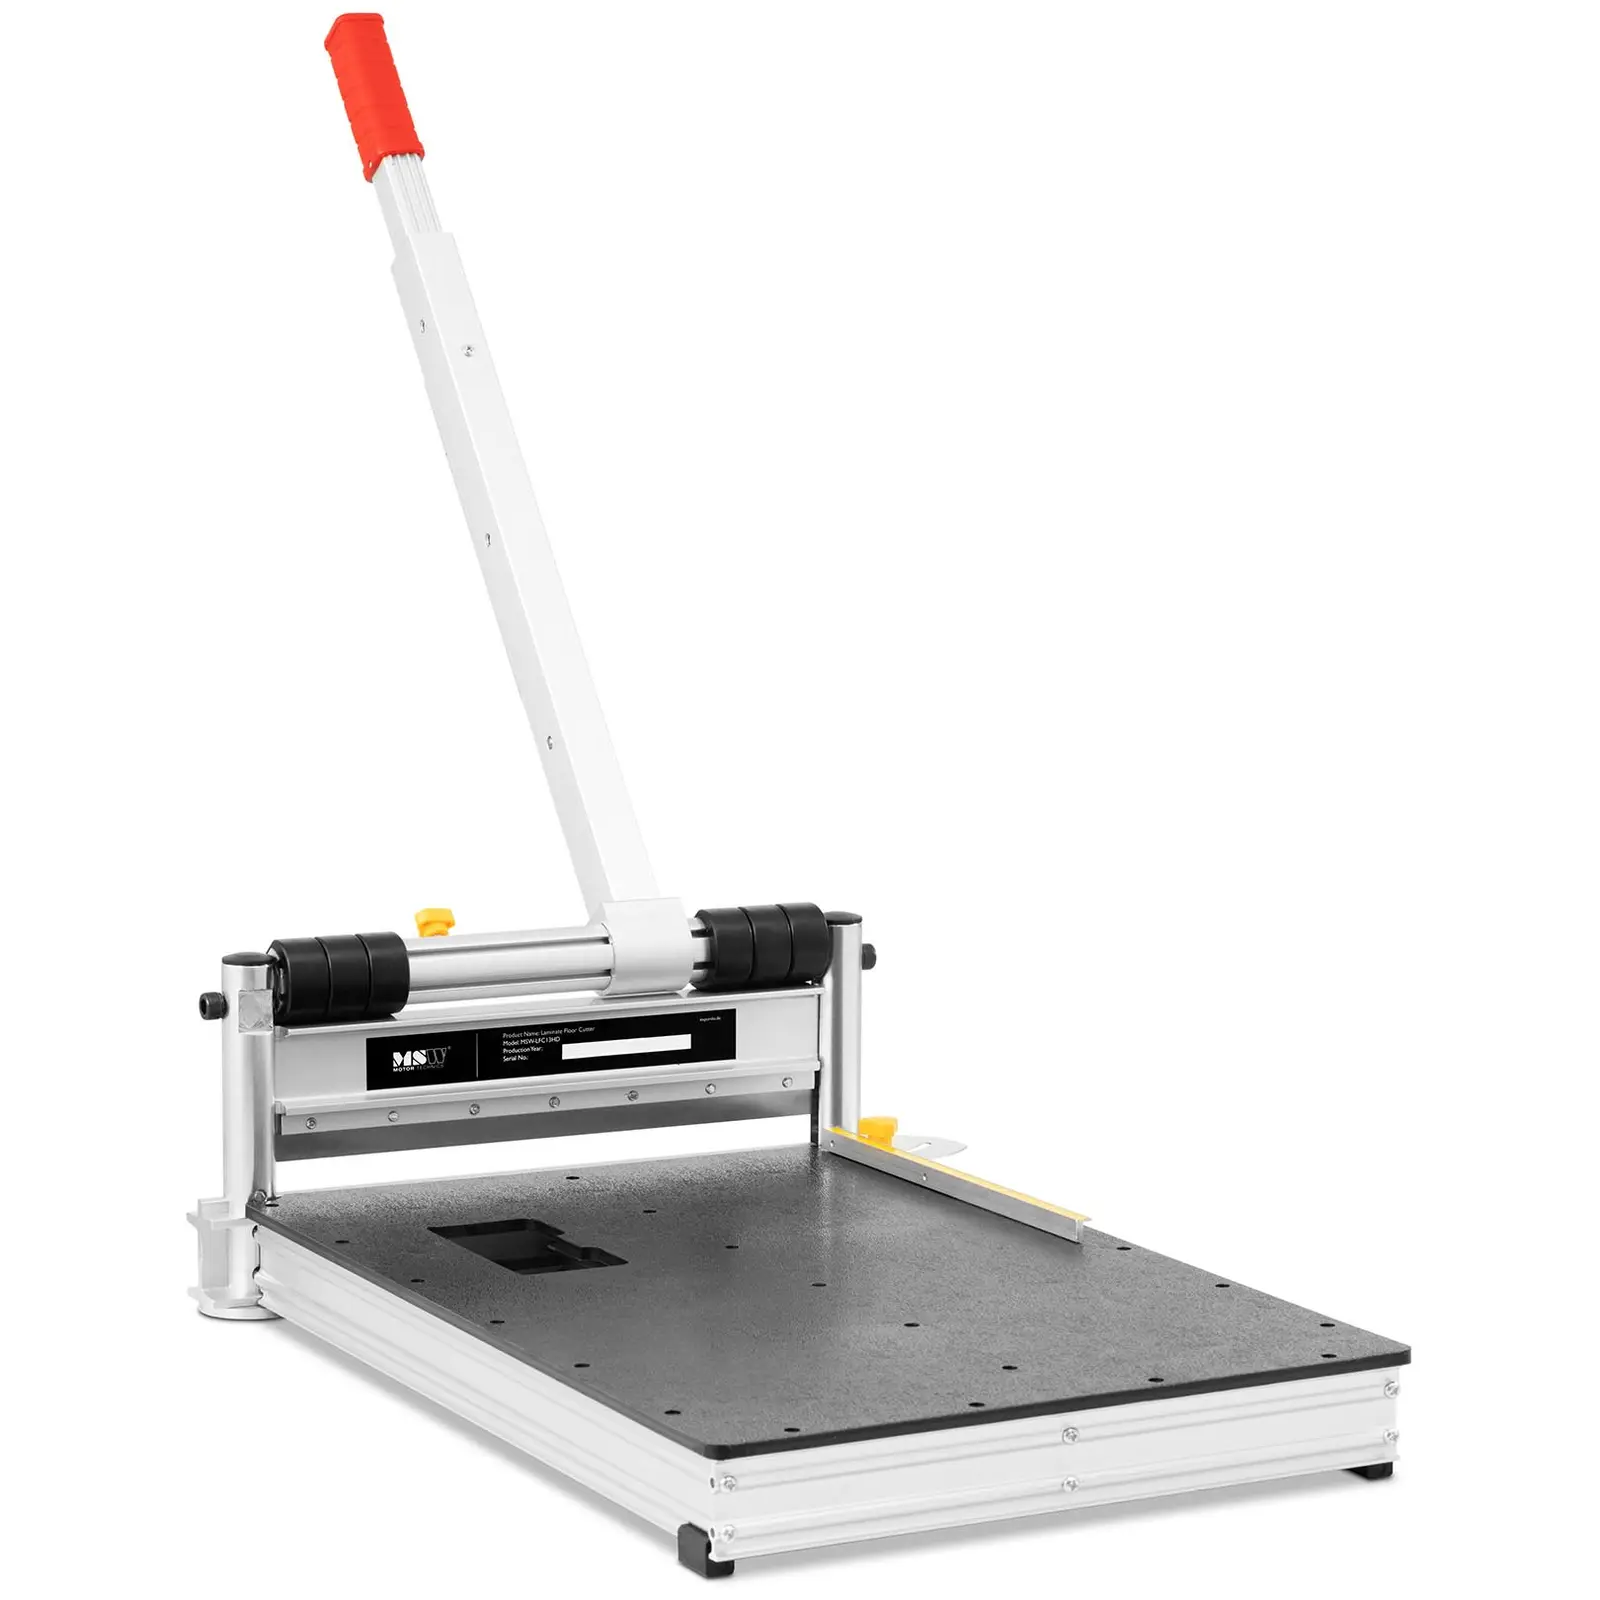 Laminate cutter - manual - thickness: 16mm - angle gauge - 330mm